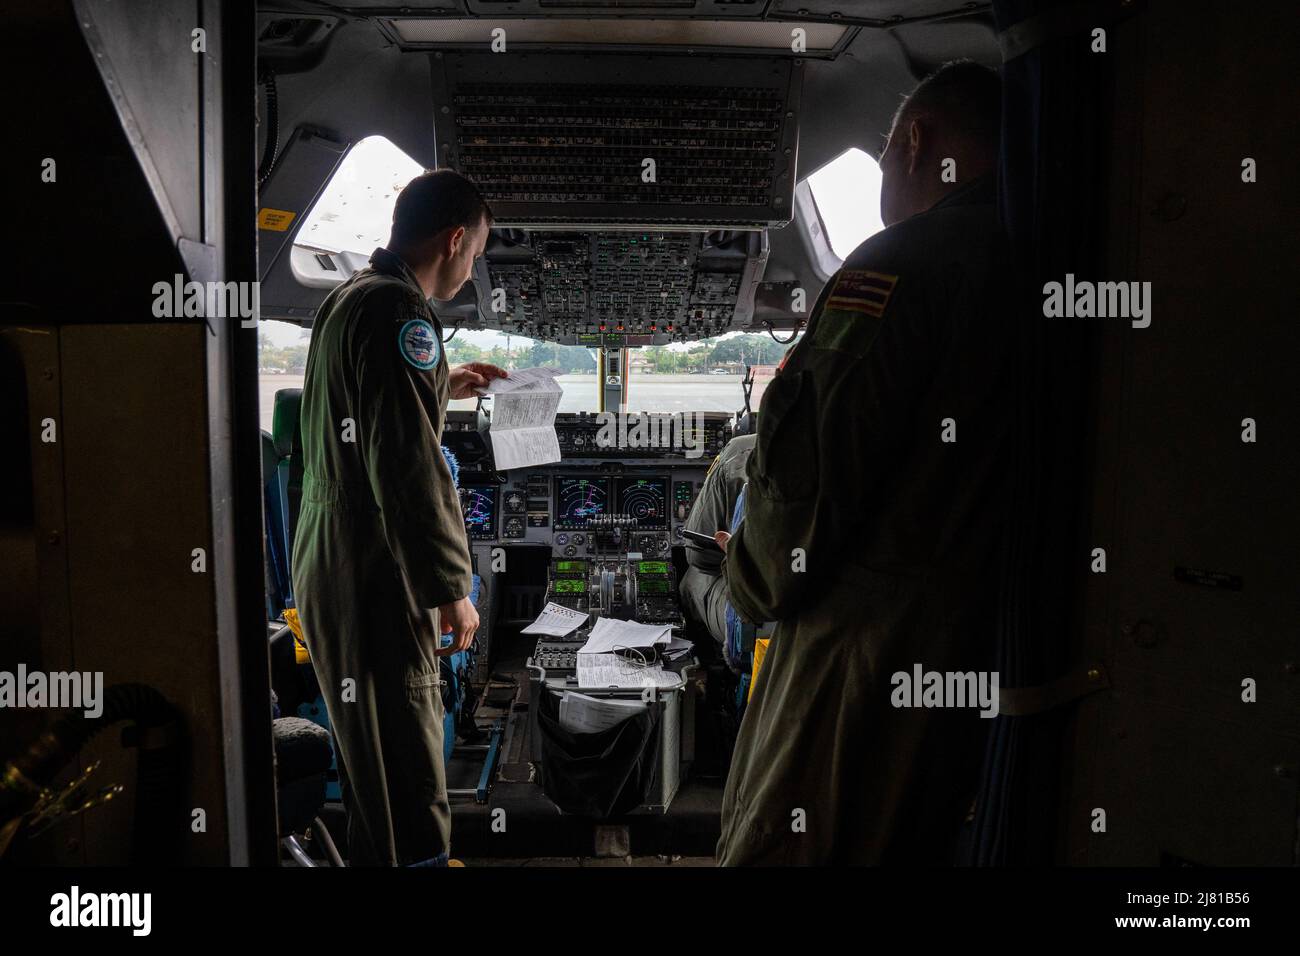 Honolulu, Hawaii, USA. 4th May, 2022. A U.S. Air Force C-17 Globemaster III aircrew review the flight plane and conduct pre-flight inspections before takeoff during Exercise Global Dexterity 2022 Joint Base Pearl Harbor-Hickam, Hawaii, May 4, 2022. The 15th Wing hosted the Royal Australian Air Force as part of Exercise Global Dexterity 2022, where U.S. and Australian C-17s and aircrew trained and flew side-by-side to learn from each other to better their airlift capabilities. Credit: Makensie Cooper/U.S. Air Force/ZUMA Press Wire Service/ZUMAPRESS.com/Alamy Live News Stock Photo